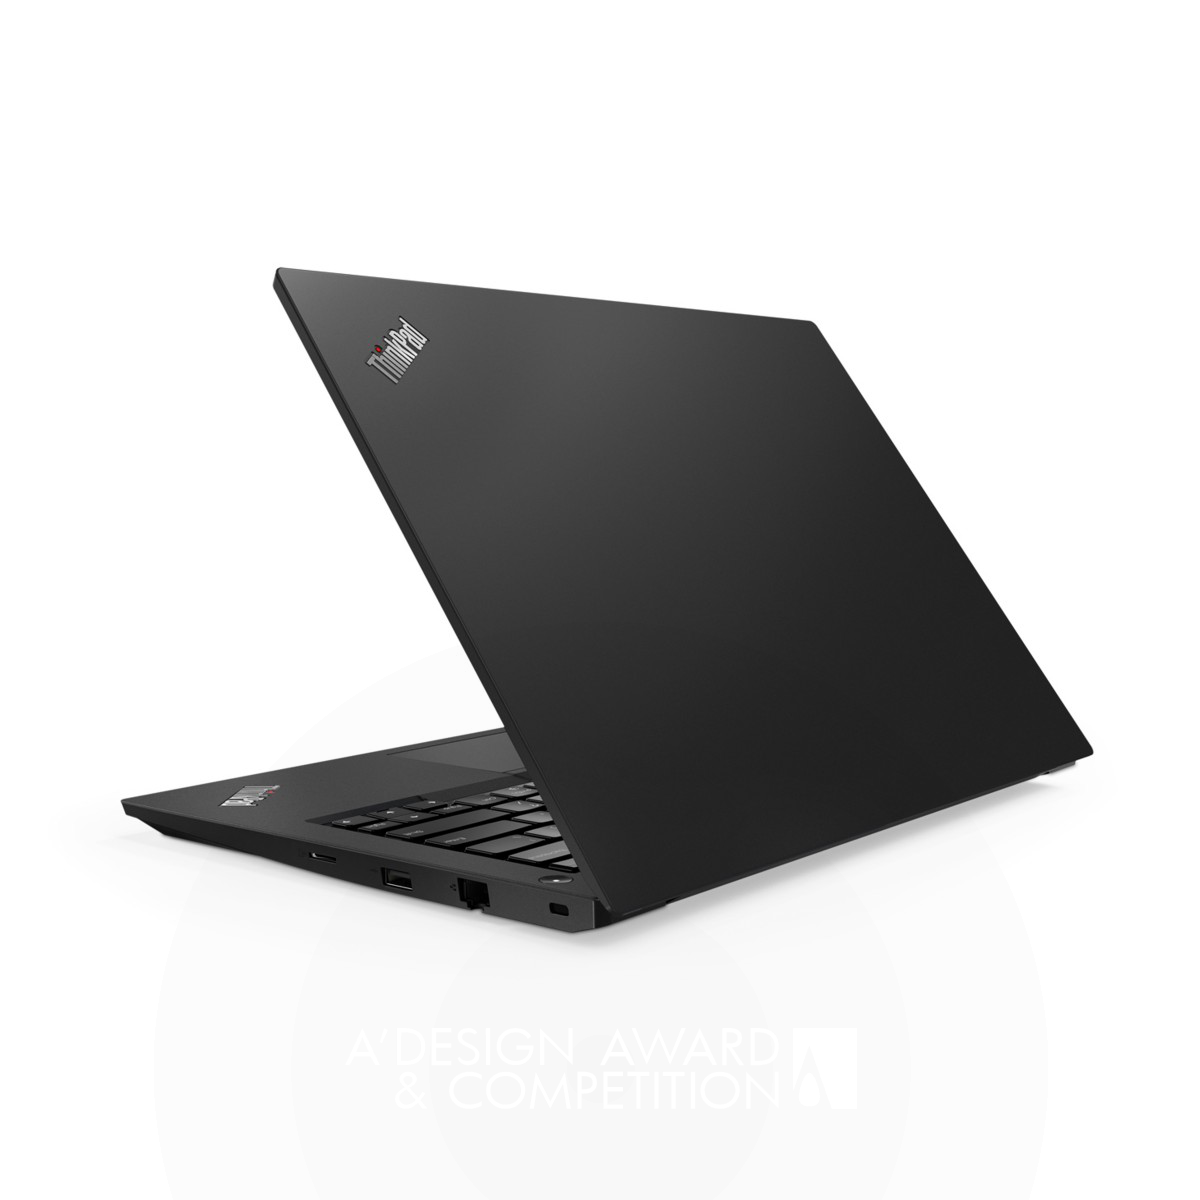 ThinkPad E series A Notebook Computer by Lenovo Design Group